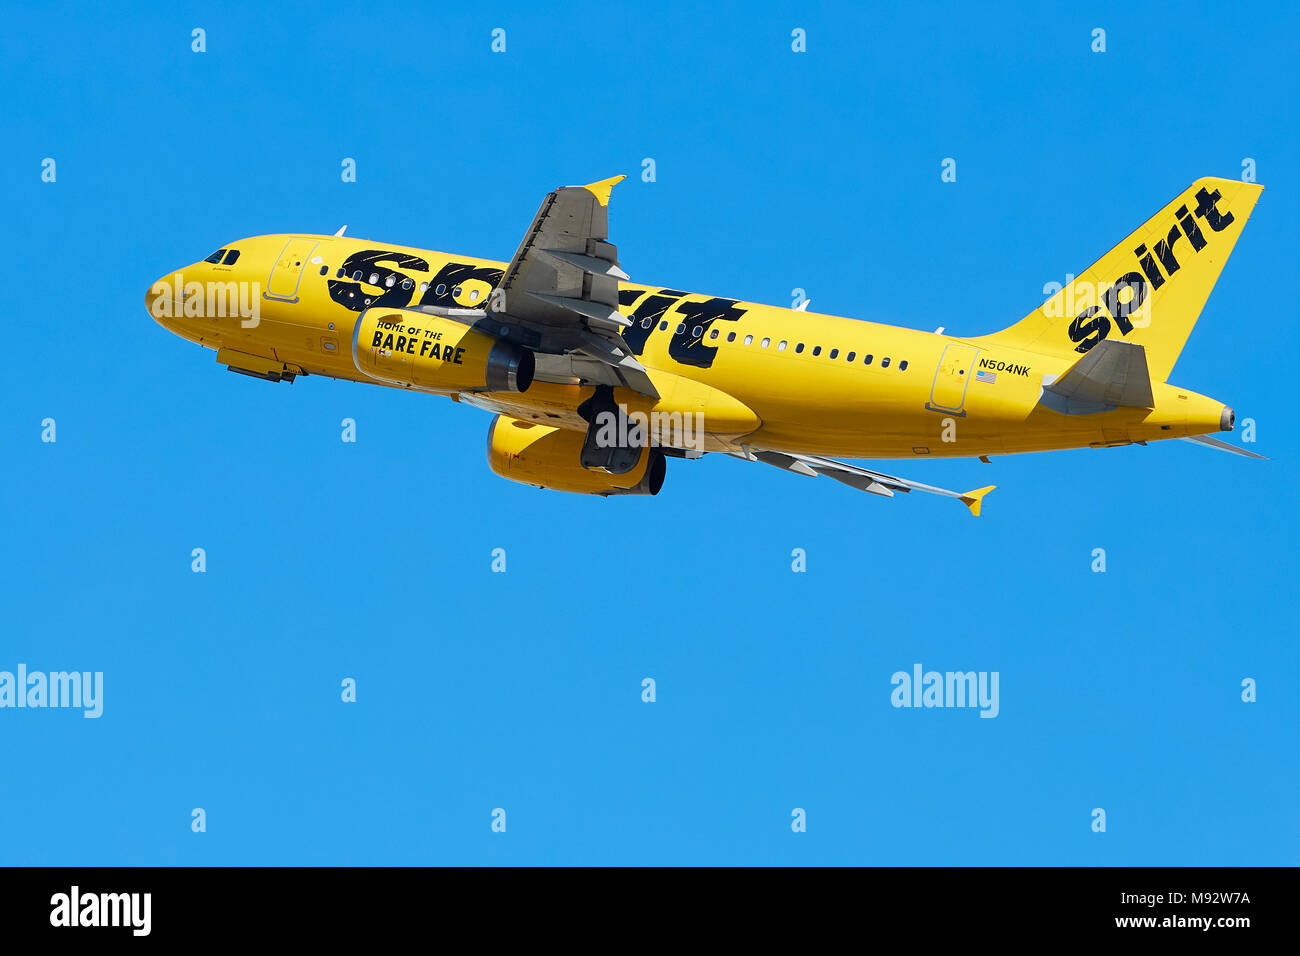 Spirit Airlines Airbus A319 Passenger Plane In The Bright Yellow Livery